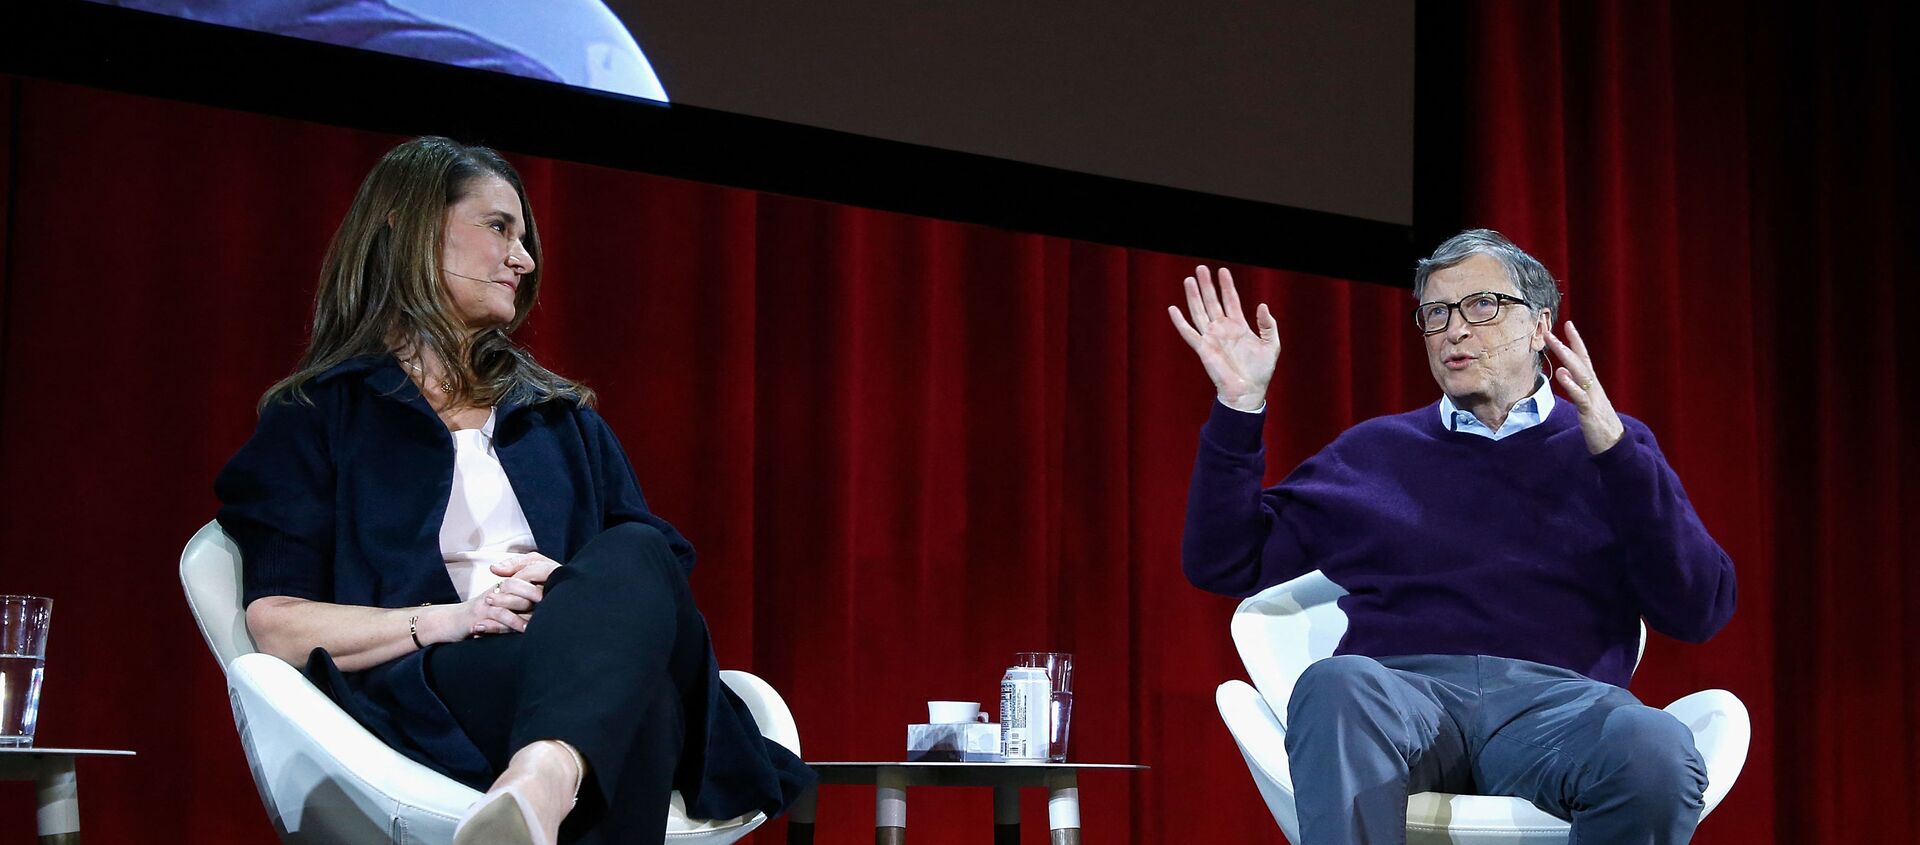 In this file photo taken on February 13, 2018 Melinda Gates and Bill Gates speak during the Lin-Manuel Miranda In conversation with Bill & Melinda Gates panel at Hunter College in New York City. - Bill Gates, the Microsoft founder-turned philanthropist, and his wife Melinda are divorcing after a 27-year-marriage, the couple said in a joint statement Monday. The announcement from one of the world's wealthiest couples, with an estimated net worth of some $130 billion, was made on Twitter.  - Sputnik International, 1920, 04.05.2021